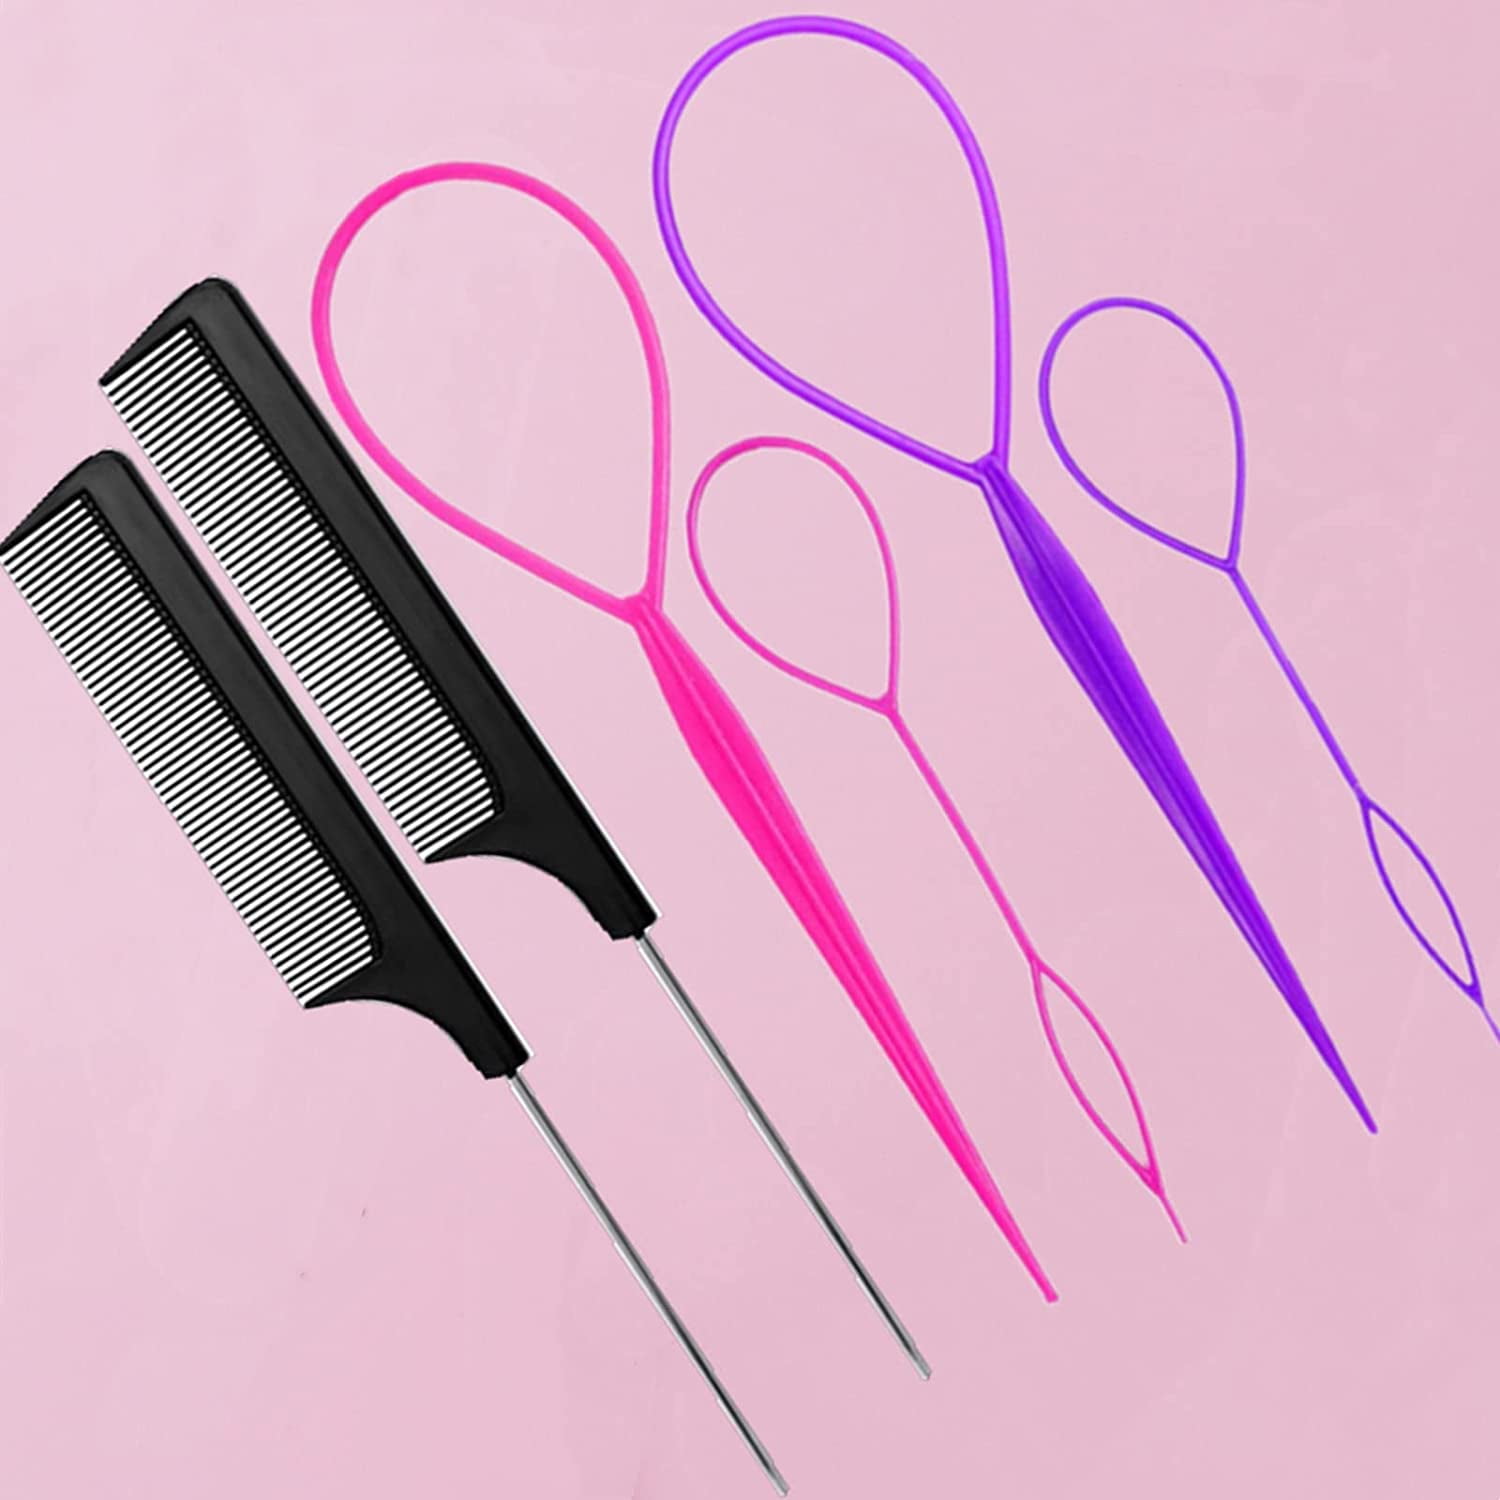 6pcs Hair Loop Styling Tool with Topsy Tail Hair Tools Set 4Pcs French  Braid Tool Loop (Pink, purple) 2pcs Metal Stainless Steel Pin Rat Tail Comb  (black) 